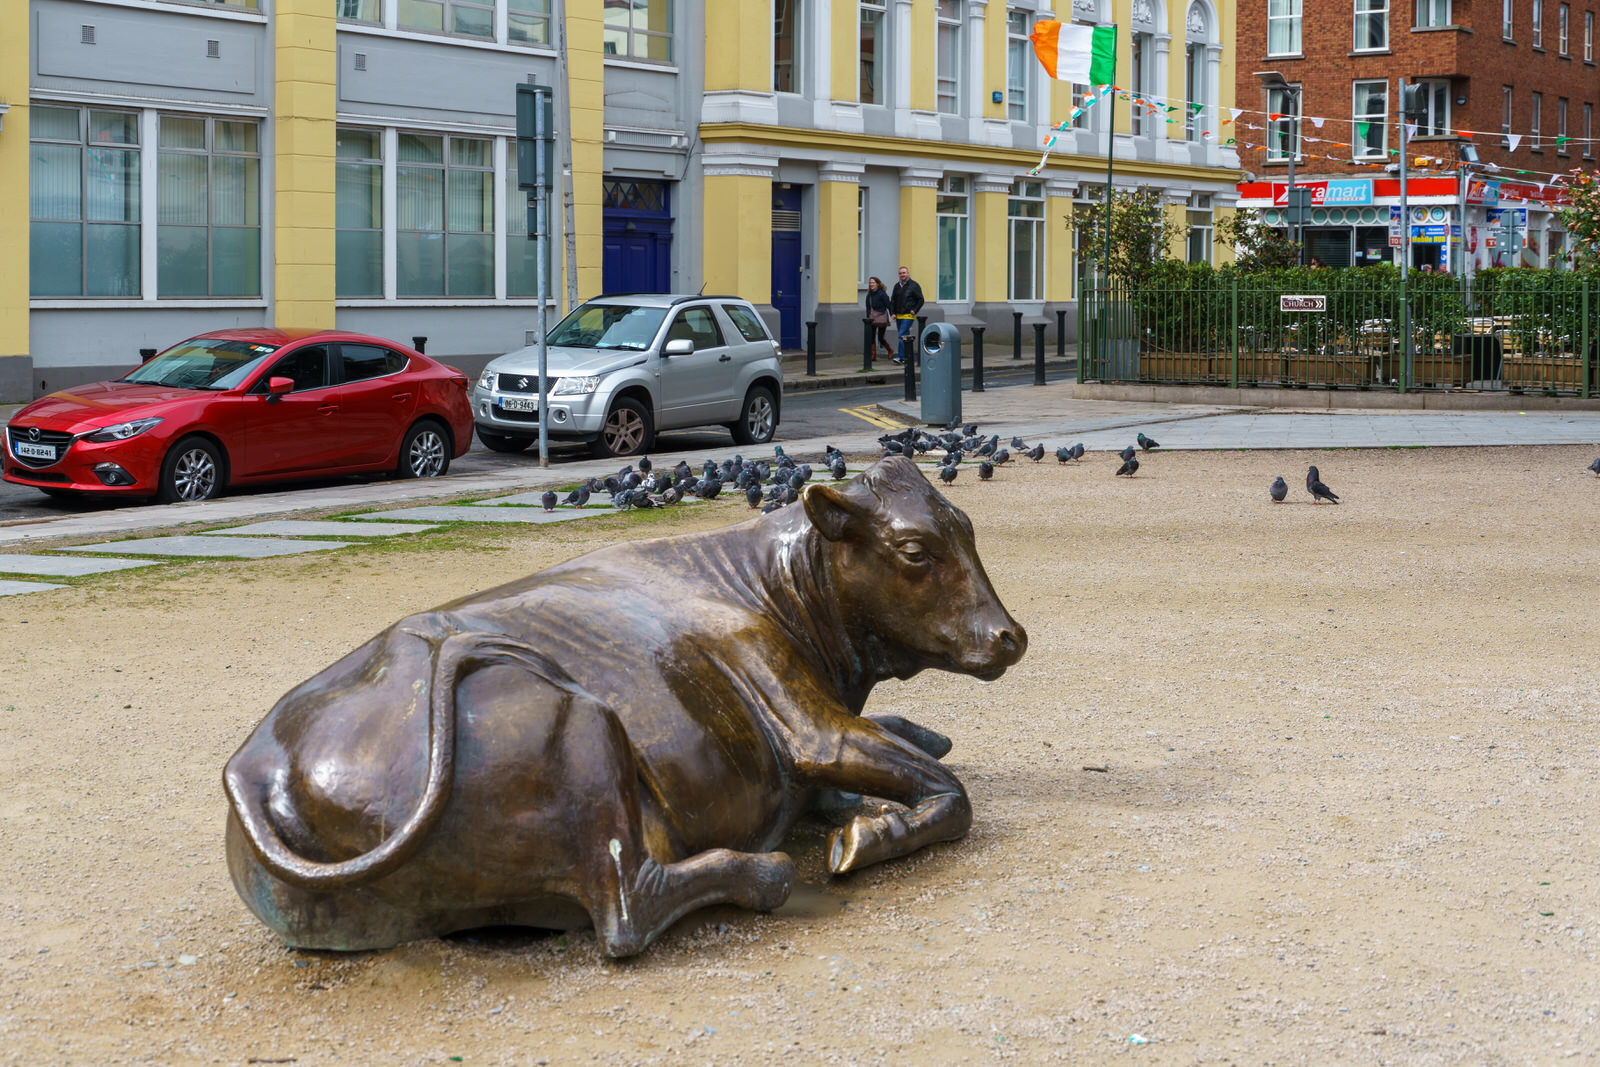 THE BRONZE COW WAS ENJOYING LIFE BACK IN 2016 [BUT IT IS NOW LONELY AS IT WAS RELOCATED TO WOOD QUAY]-233990-1